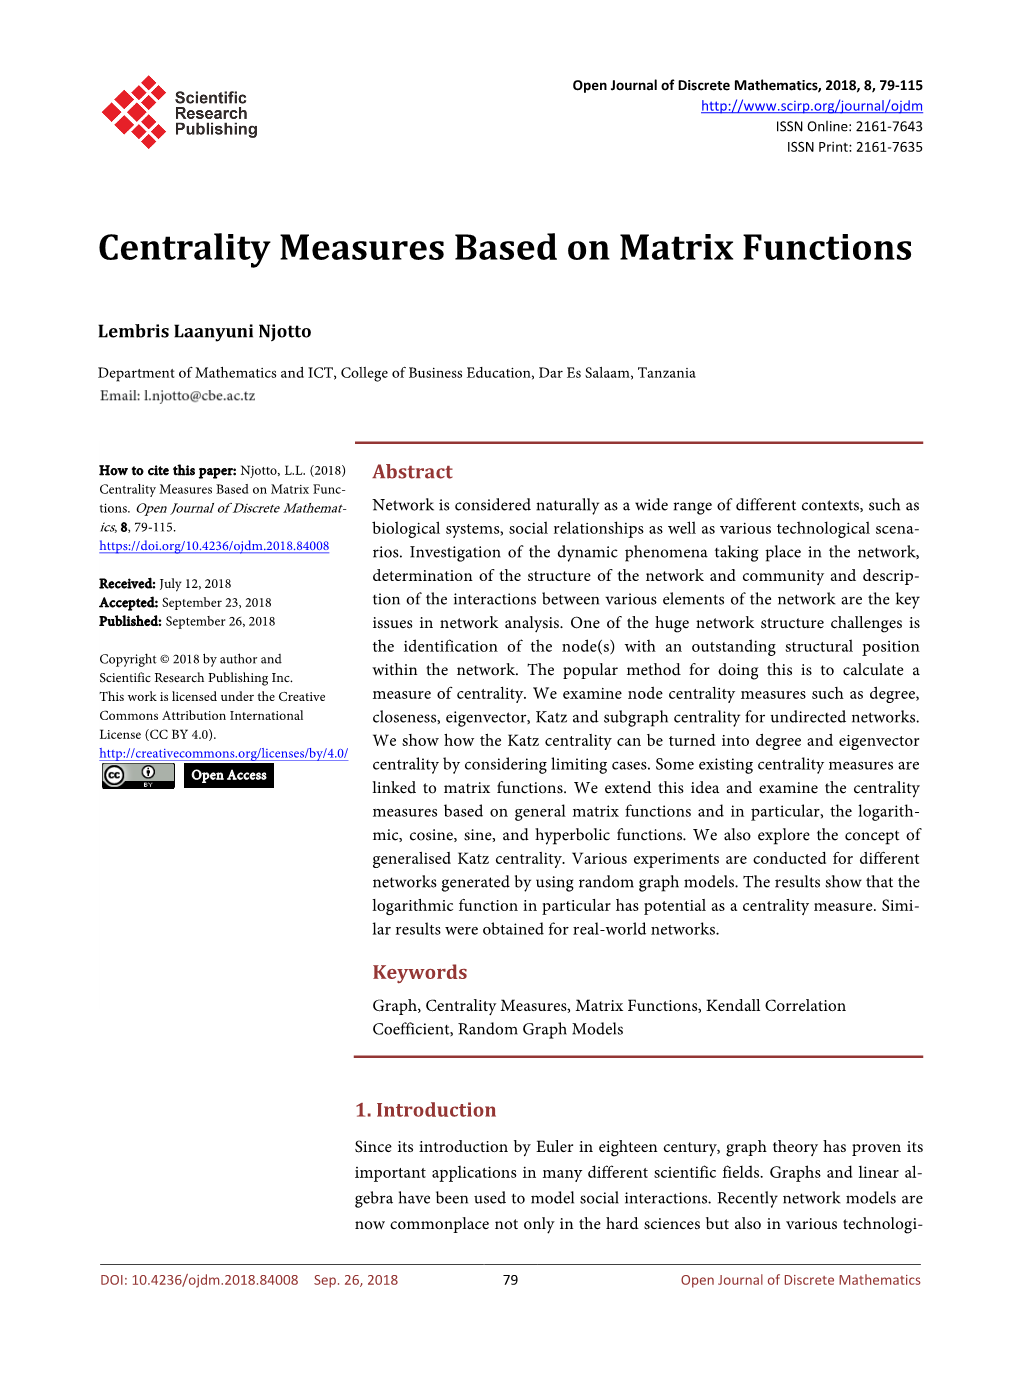 Centrality Measures Based on Matrix Functions